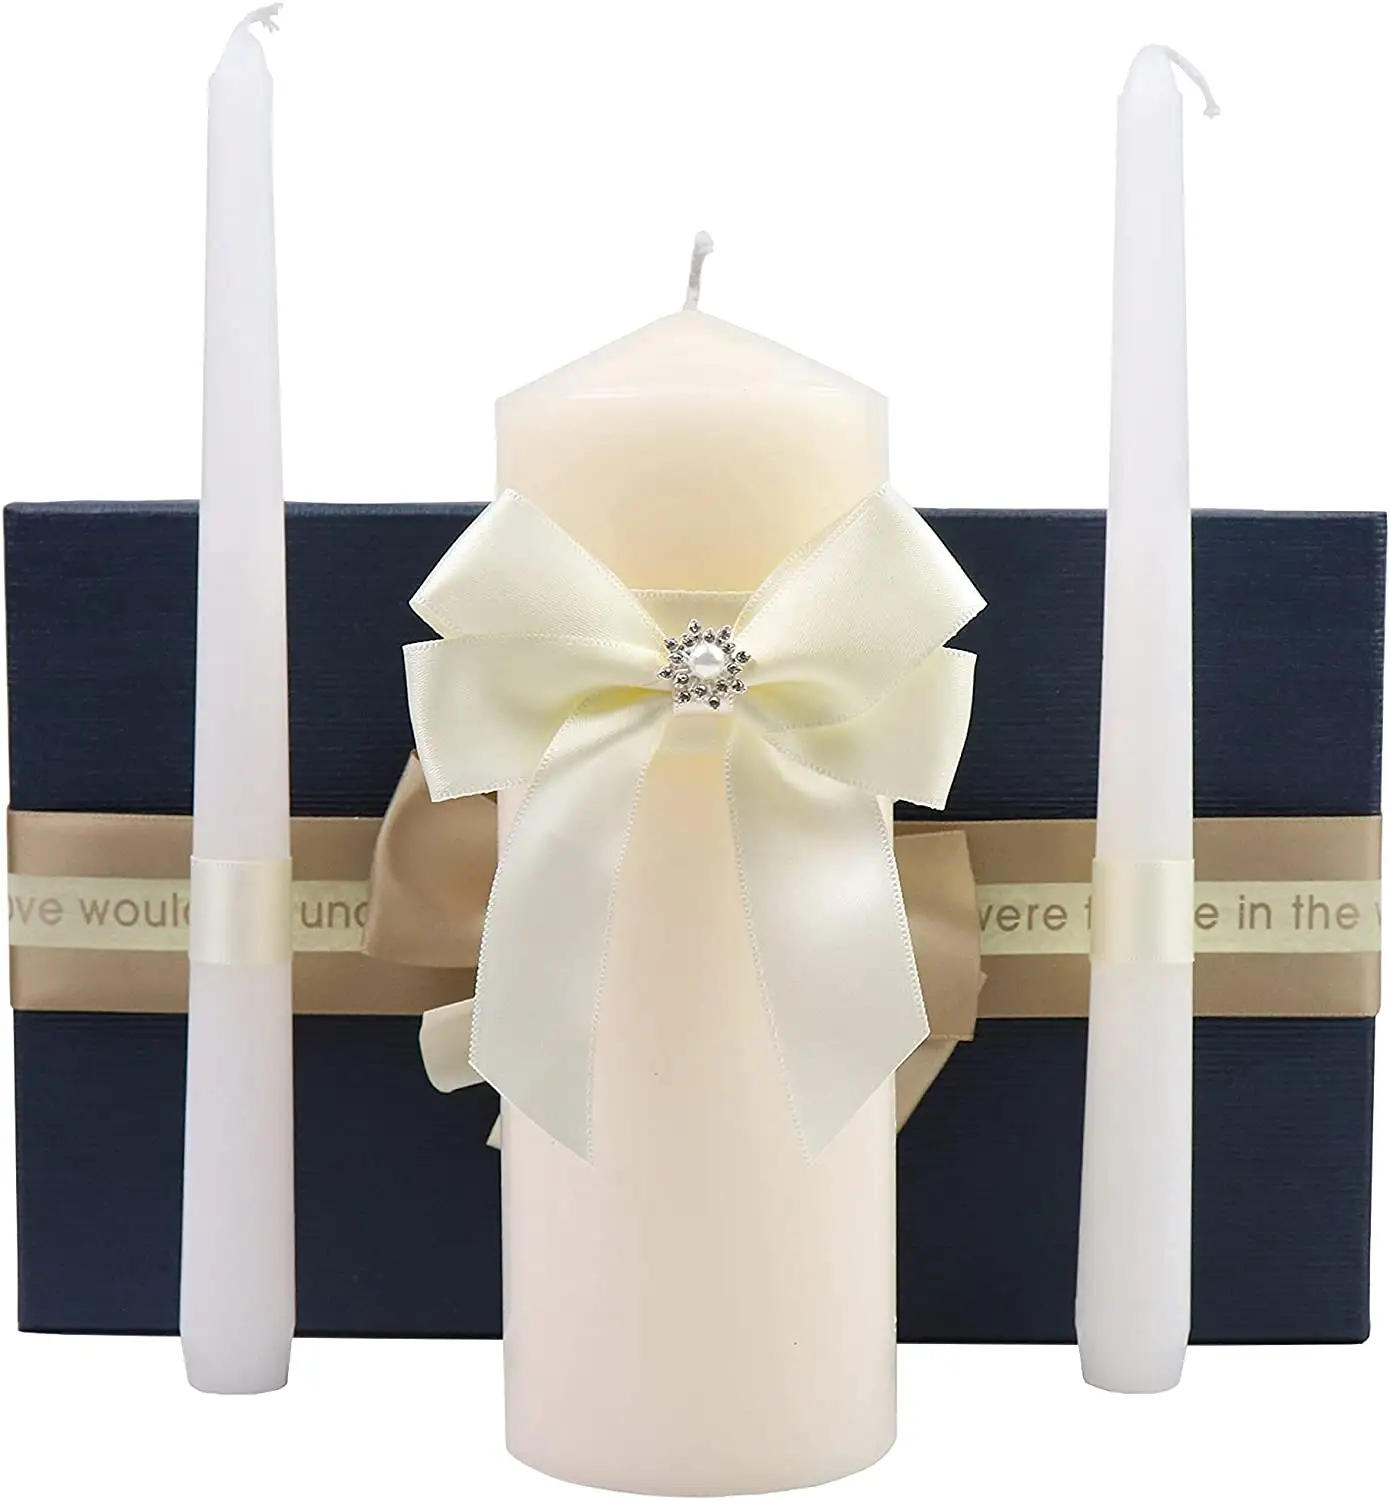 Luxury white Wedding Unity Candle Set with gift box For Home Party Festival Decor